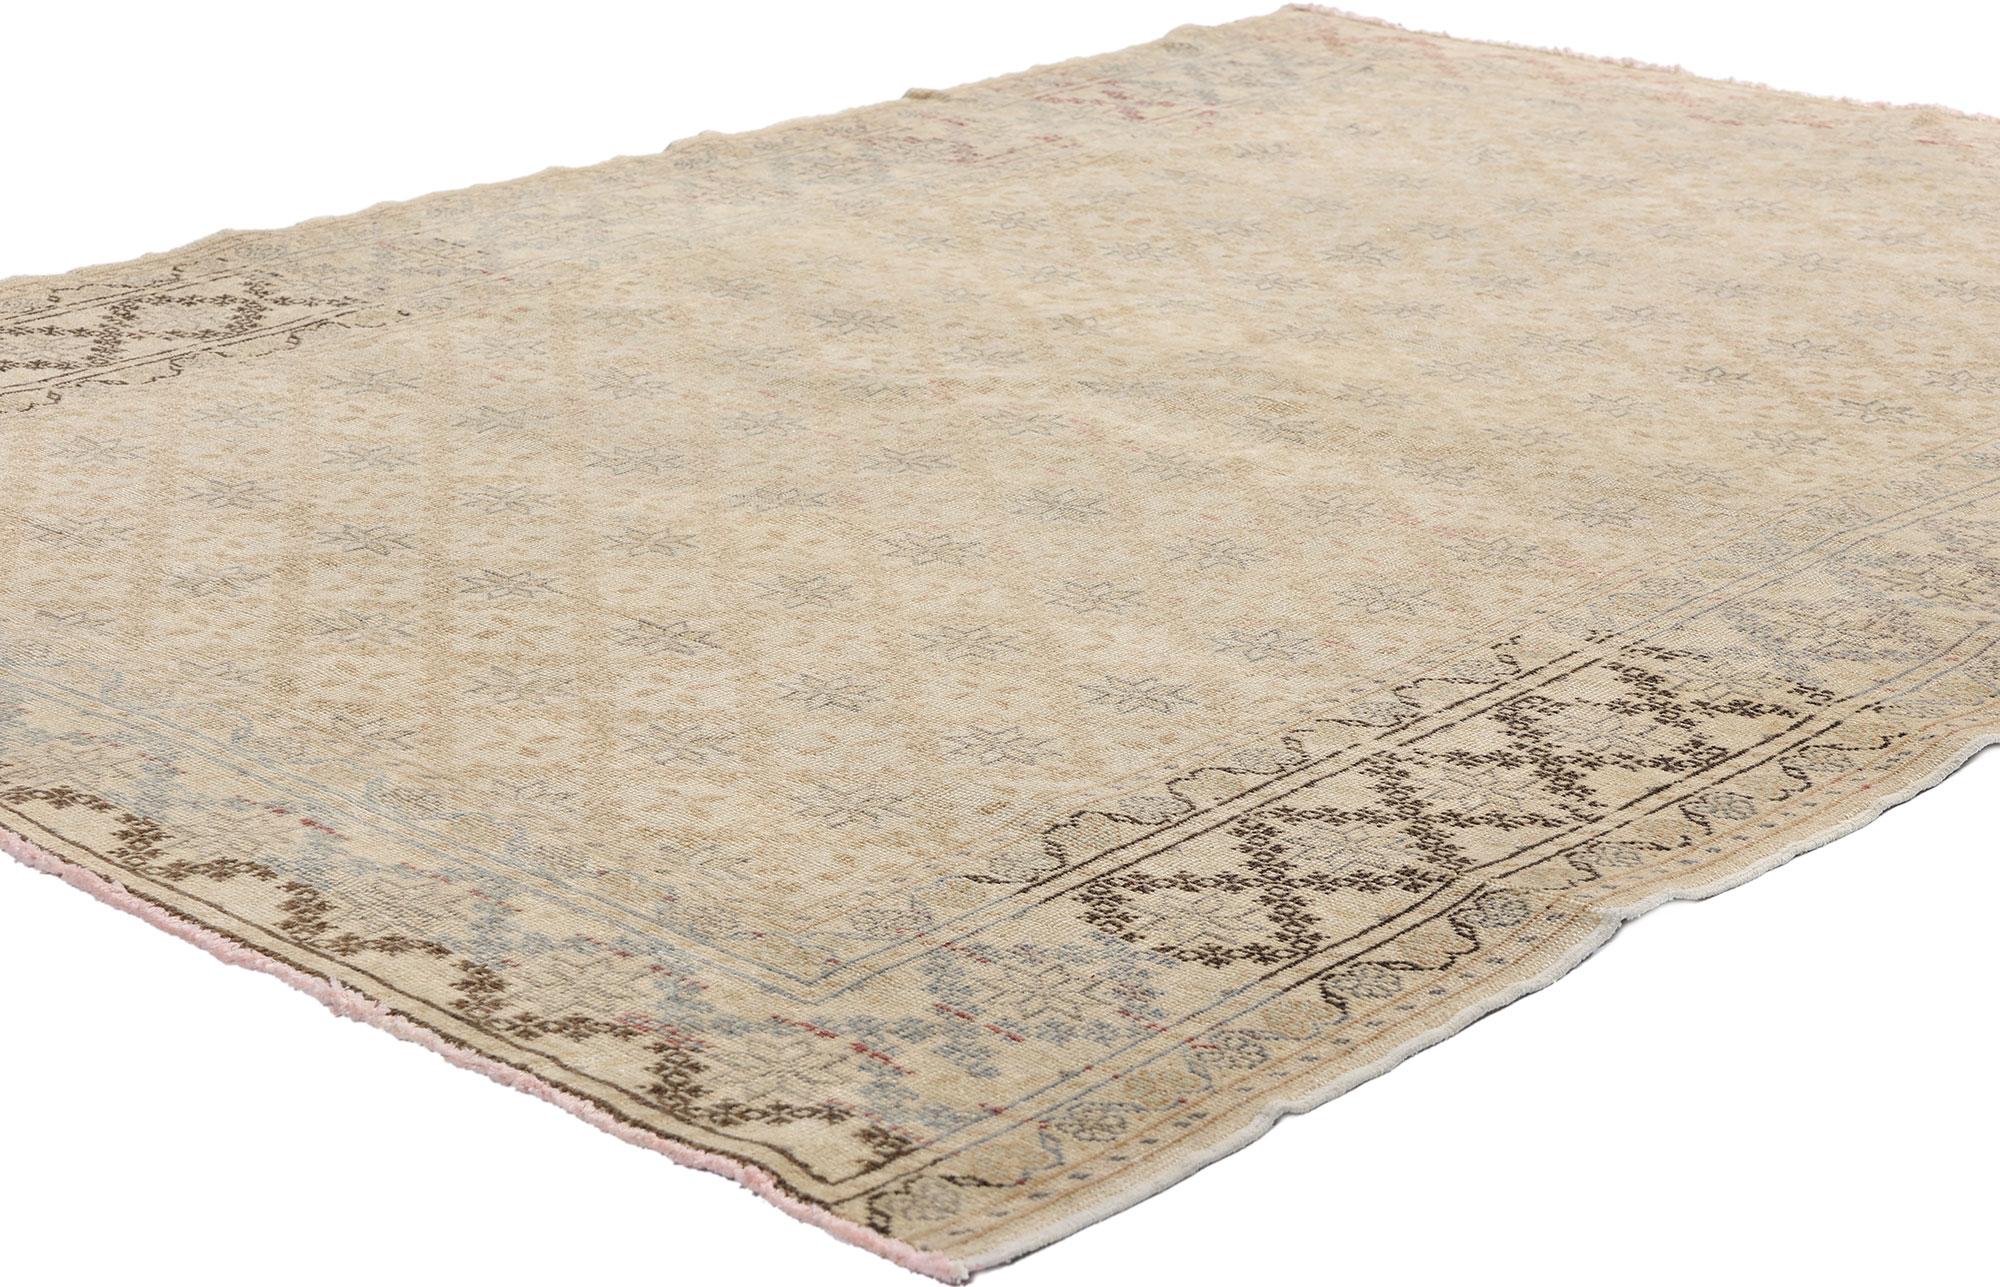 53938 Distressed Vintage Turkish Sivas Rug, 03'10 x  05'04. Antique-wash Turkish Sivas rugs, originating from Sivas in central Anatolia, Turkey, are renowned for their vintage aesthetic achieved through a special treatment. With a faded or